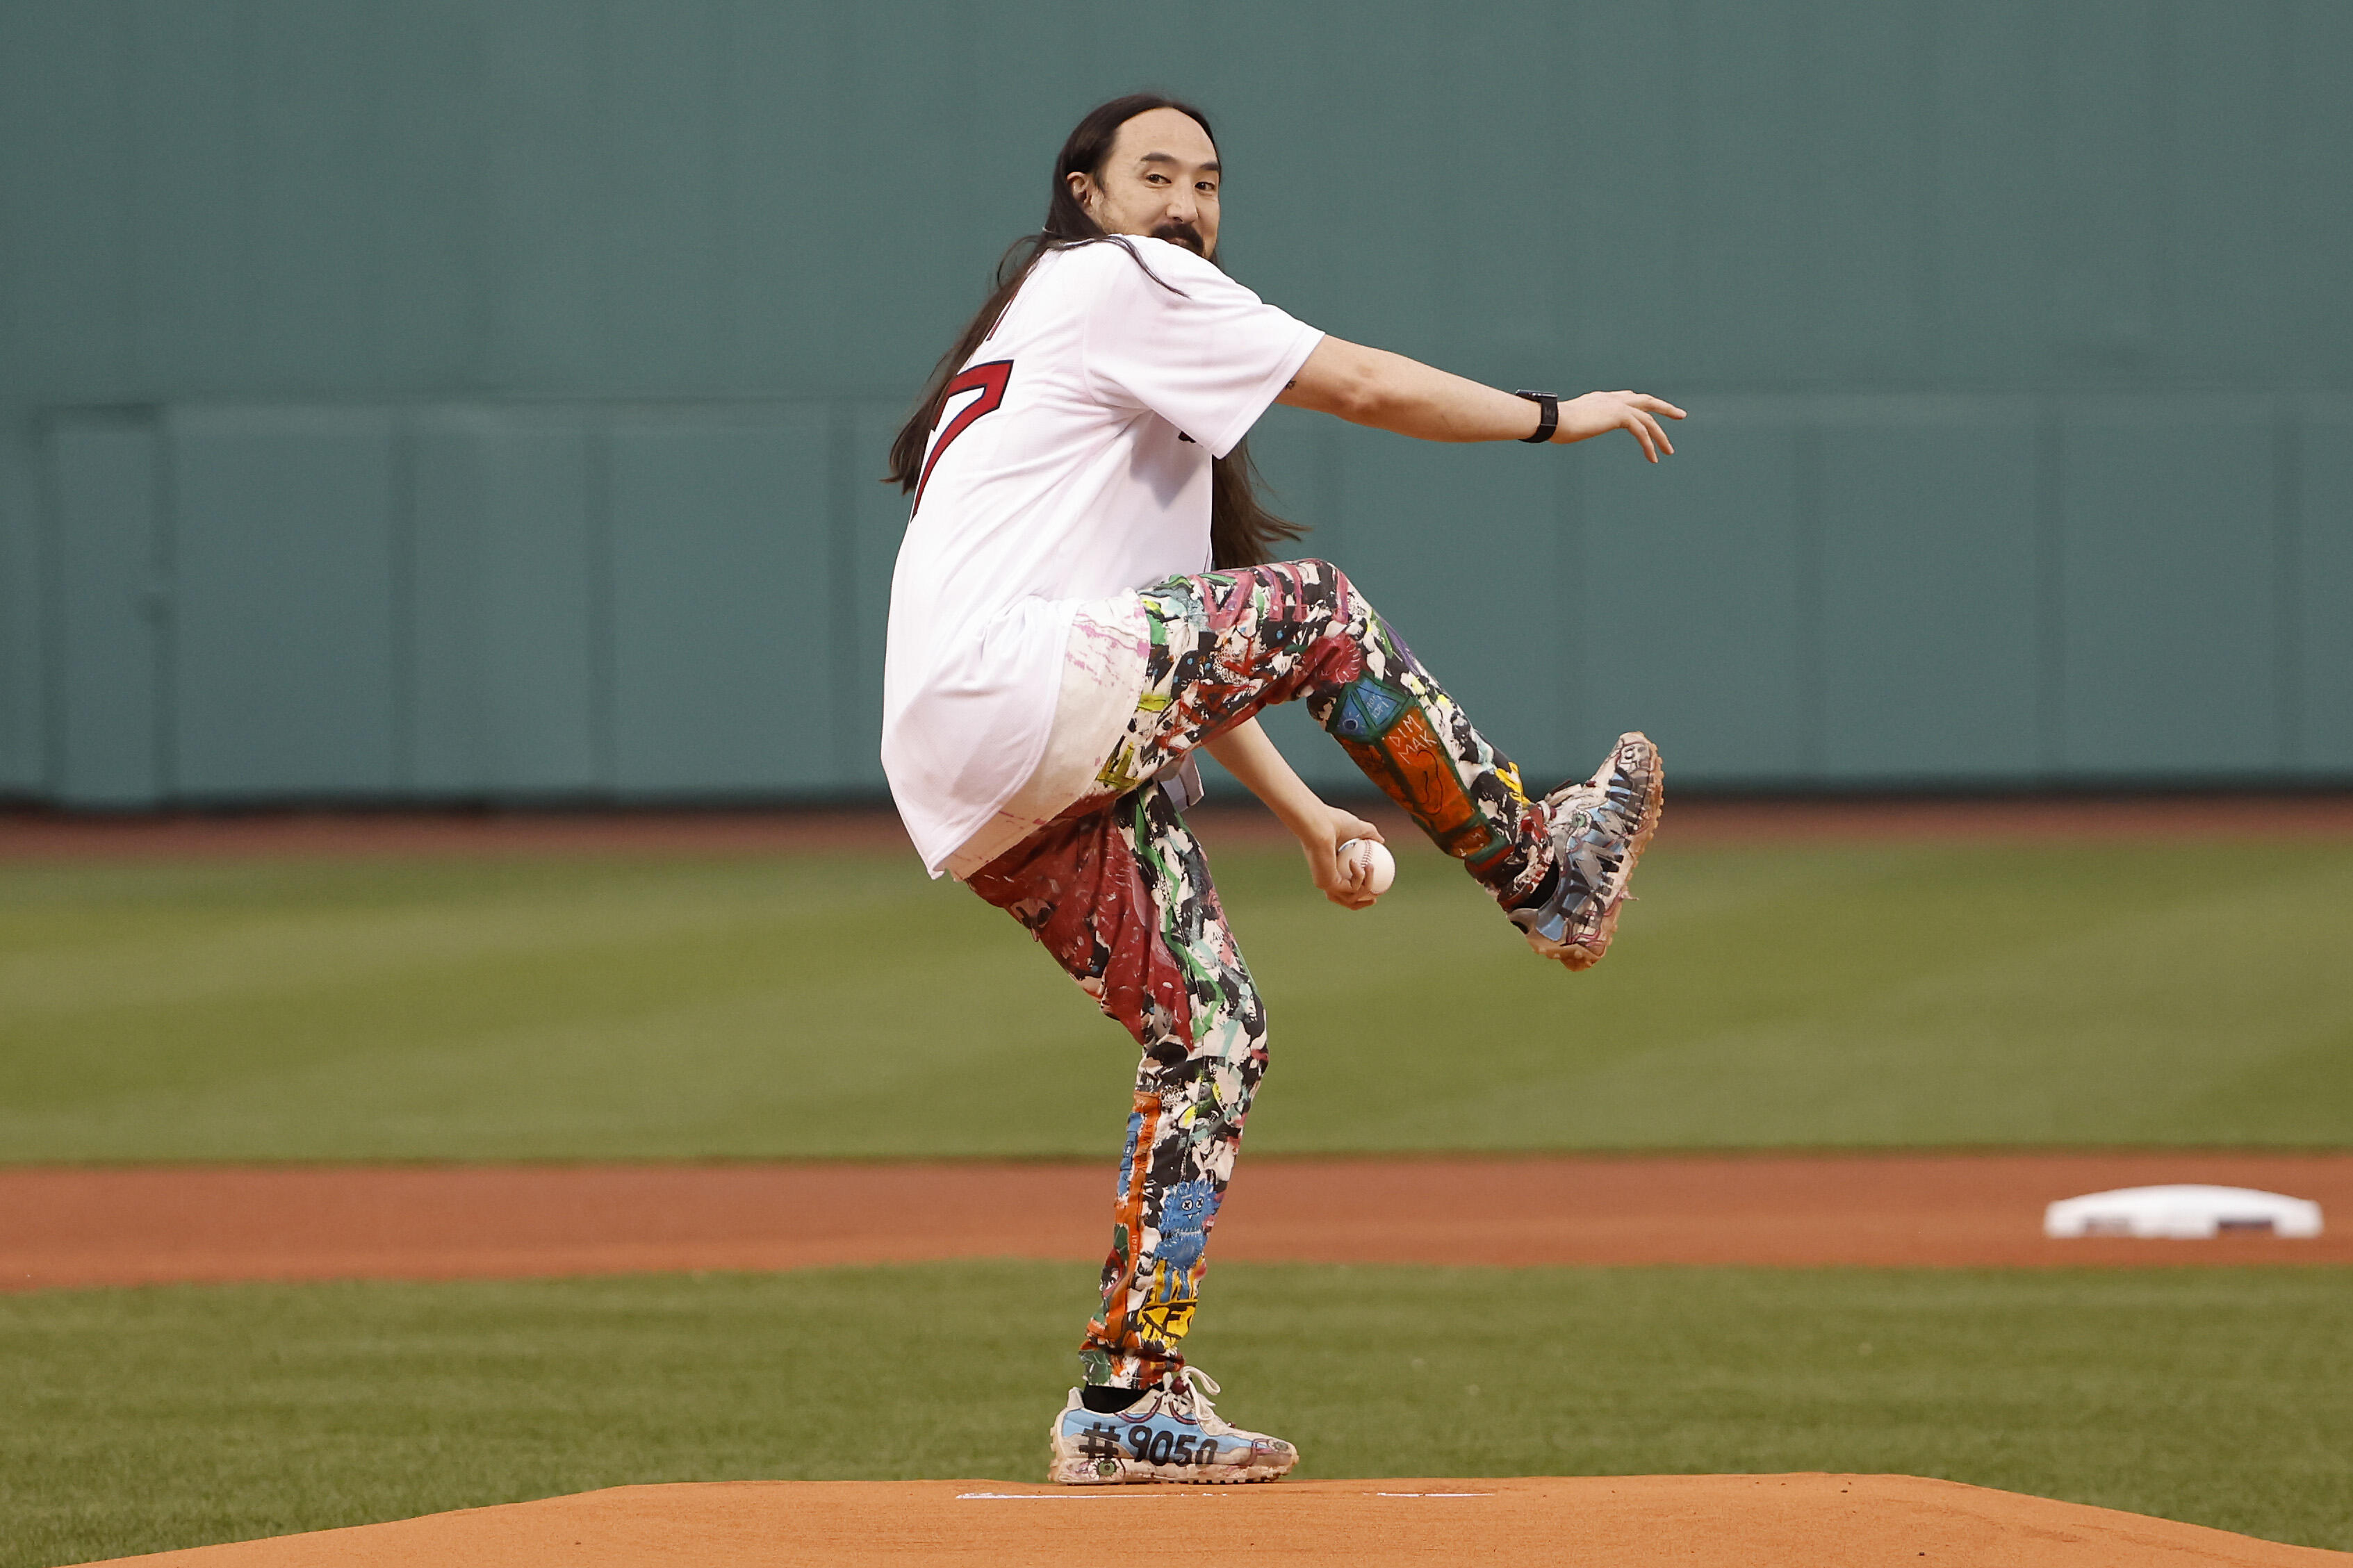 Sports: DJ Steve Aoki's Terrible First Pitch At Last Night's Astros Game